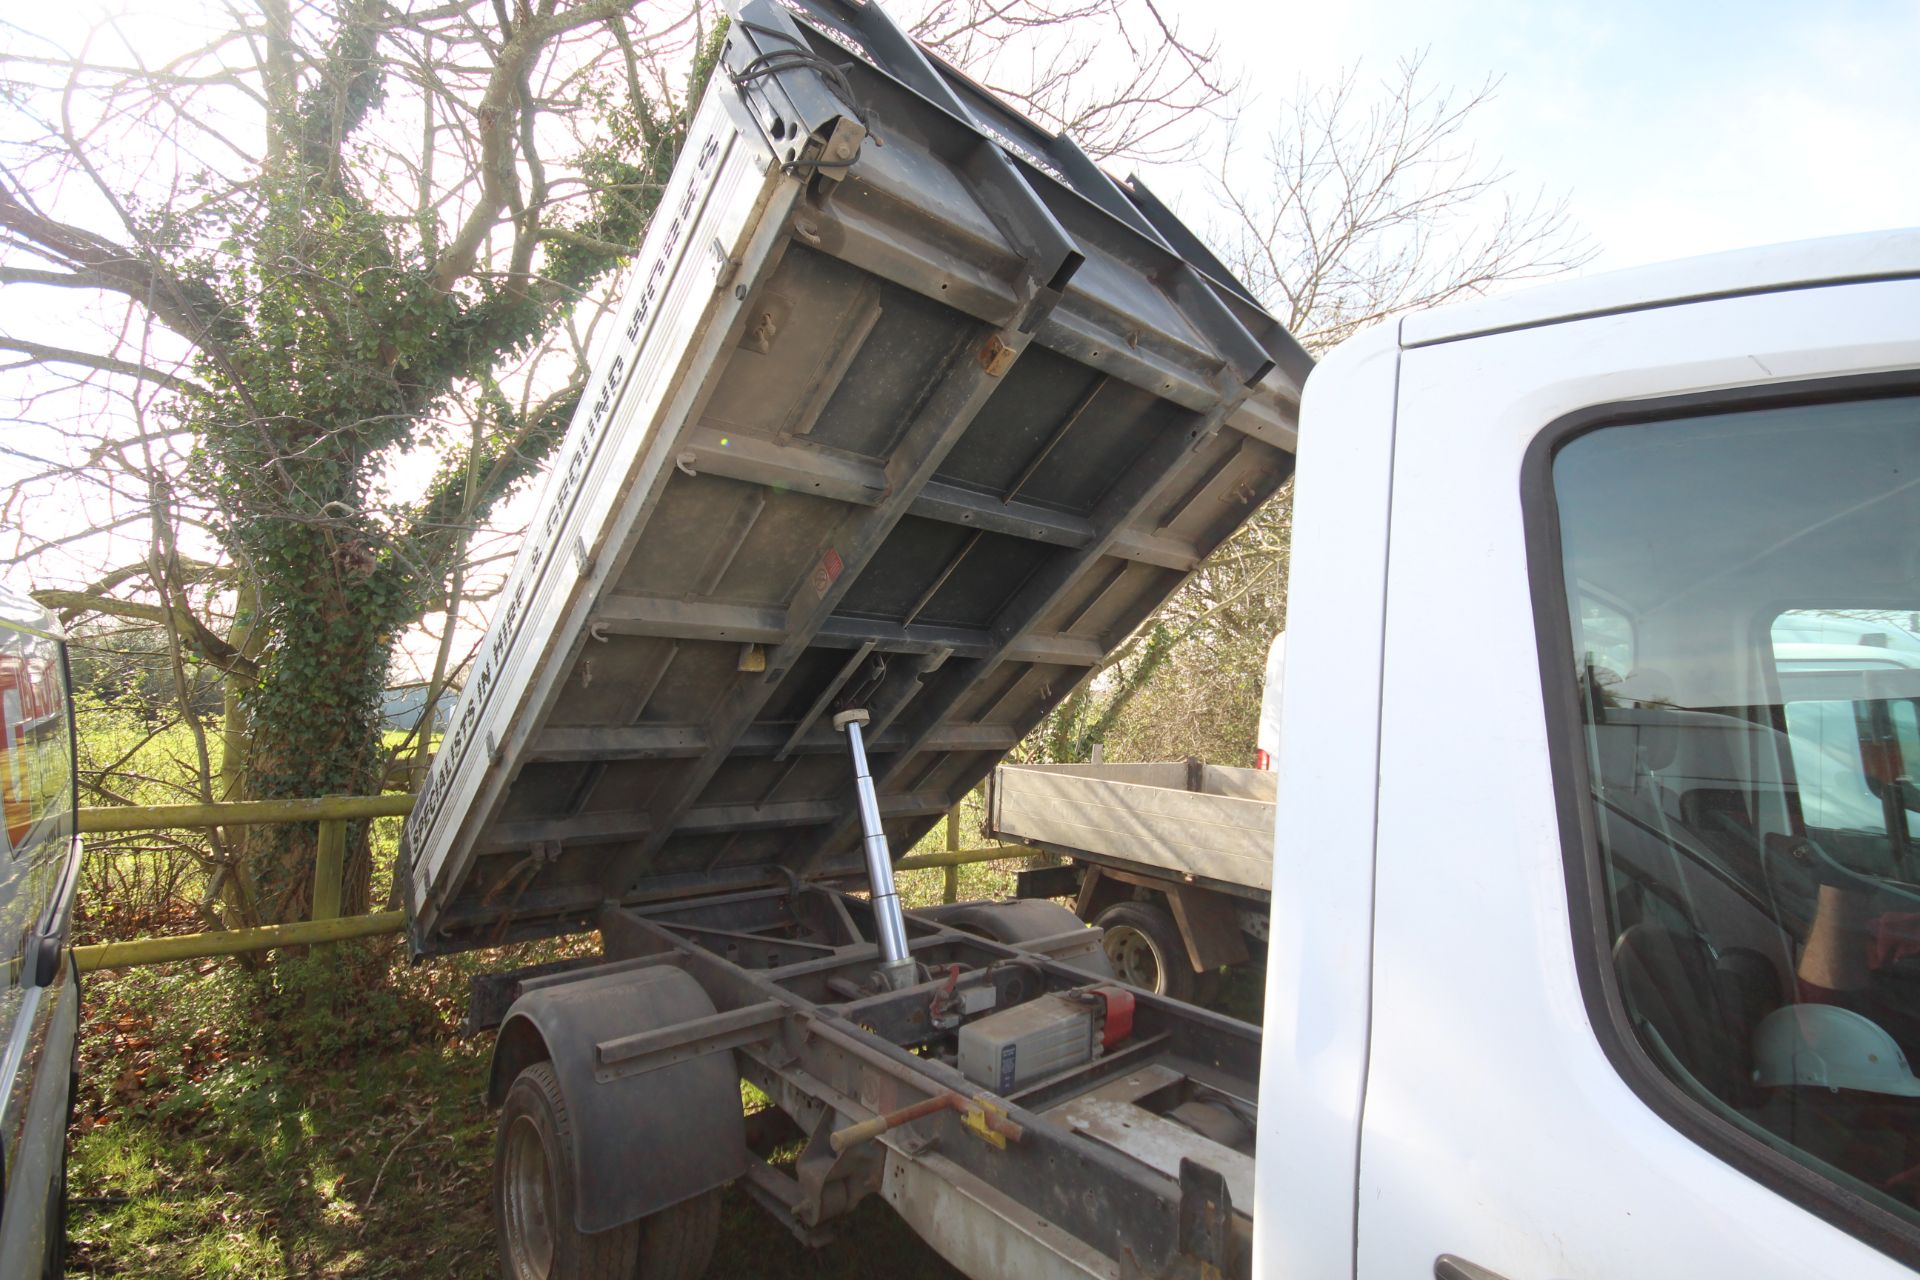 Ford Transit 350 2L diesel manual drop-side tipper. Registration AY18 NSU. Date of first - Image 56 of 64